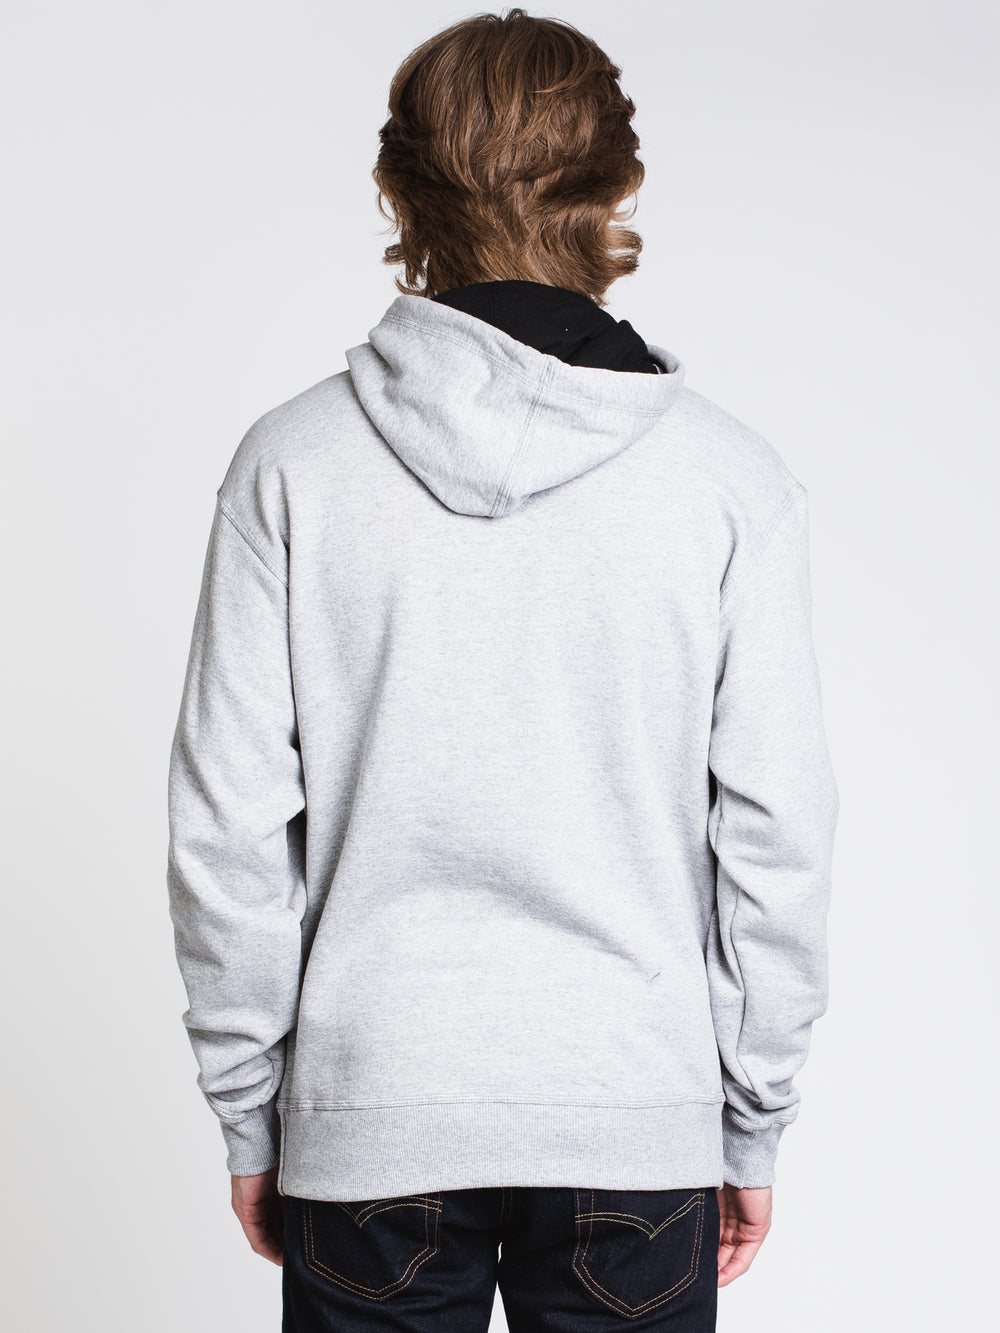 MENS COLOUR POP PULLOVER HOODIE - GREY/ROYAL - CLEARANCE